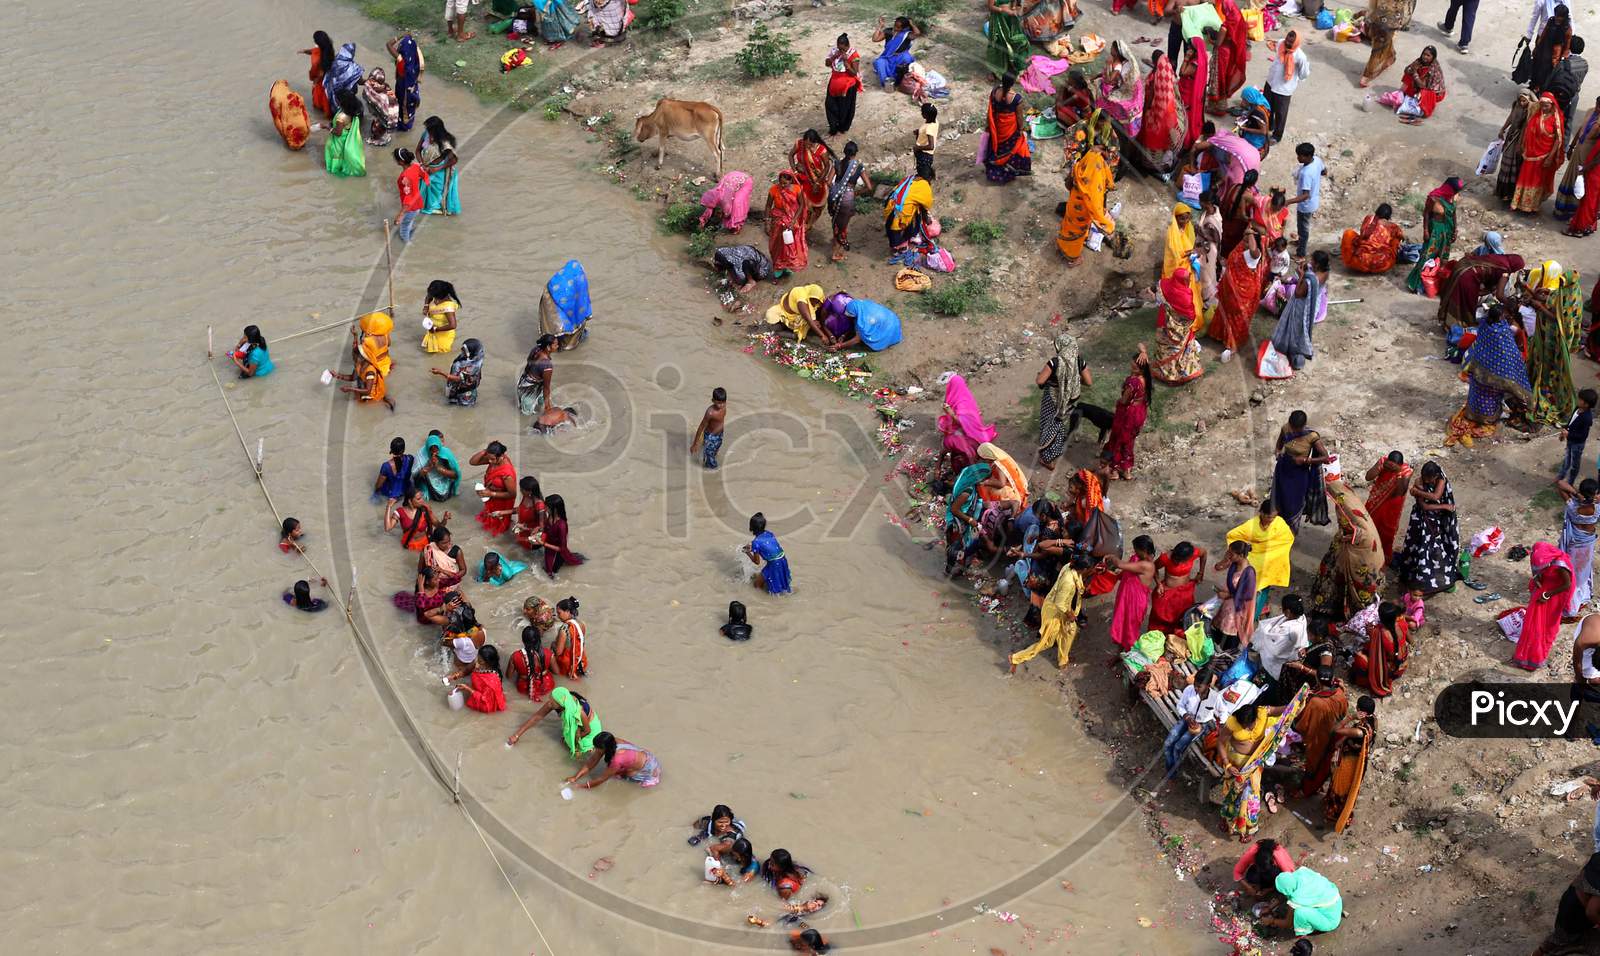 Hindu women devotees take holy dip in the Ganga river on the occasion of Teej festival for the long life of their husband in Prayagraj, August 21, 2020.